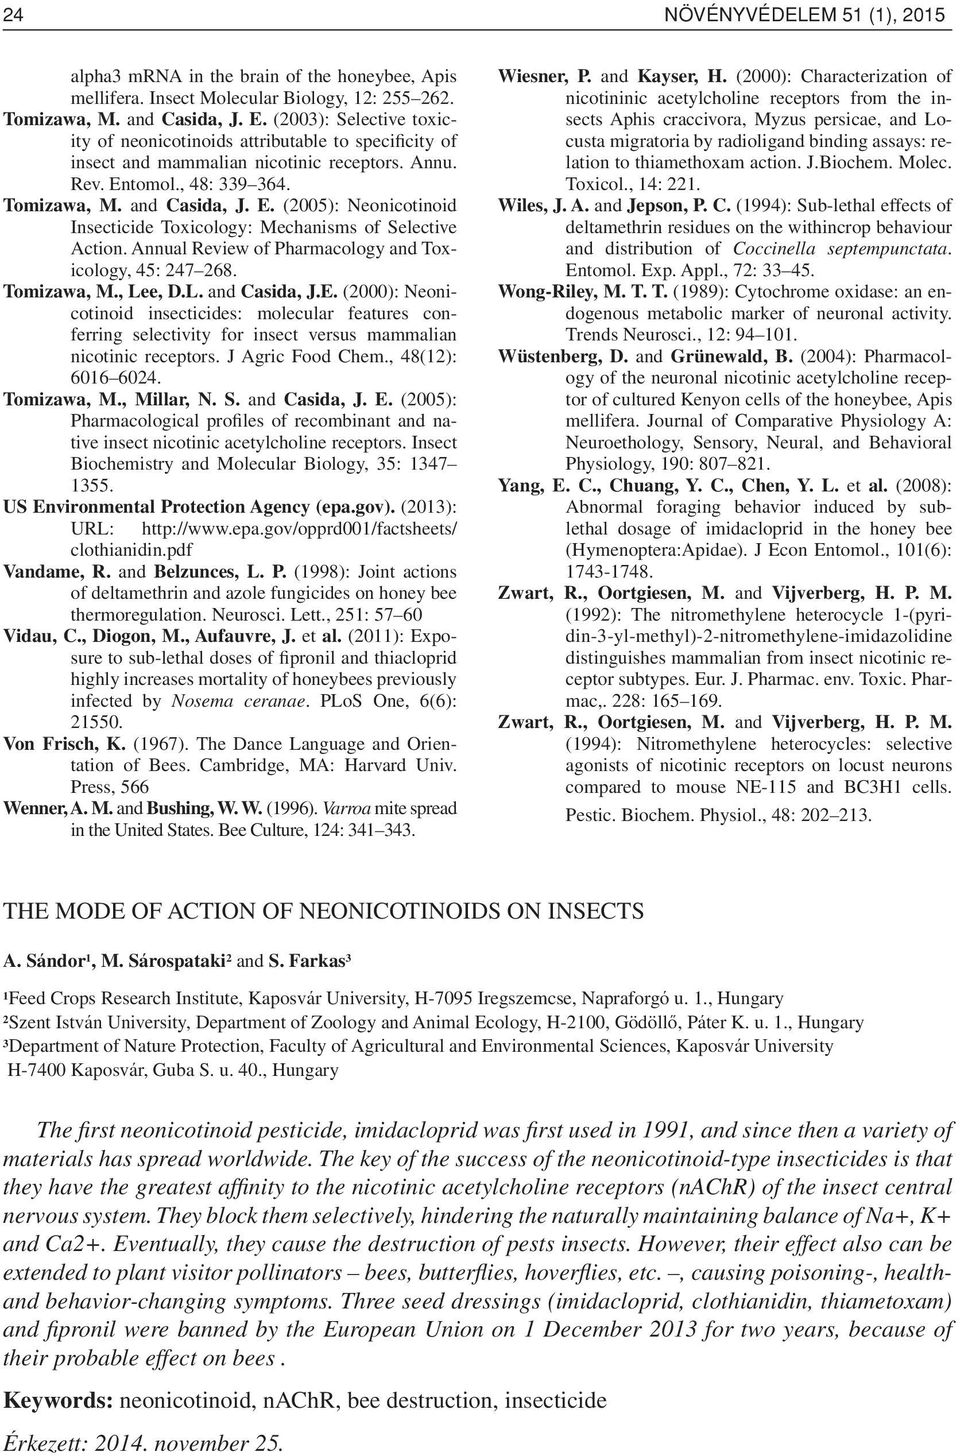 tomol., 48: 339 364. Tomizawa, M. and Casida, J. E. (2005): Neonicotinoid Insecticide Toxicology: Mechanisms of Selective Action. Annual Review of Pharmacology and Toxicology, 45: 247 268.